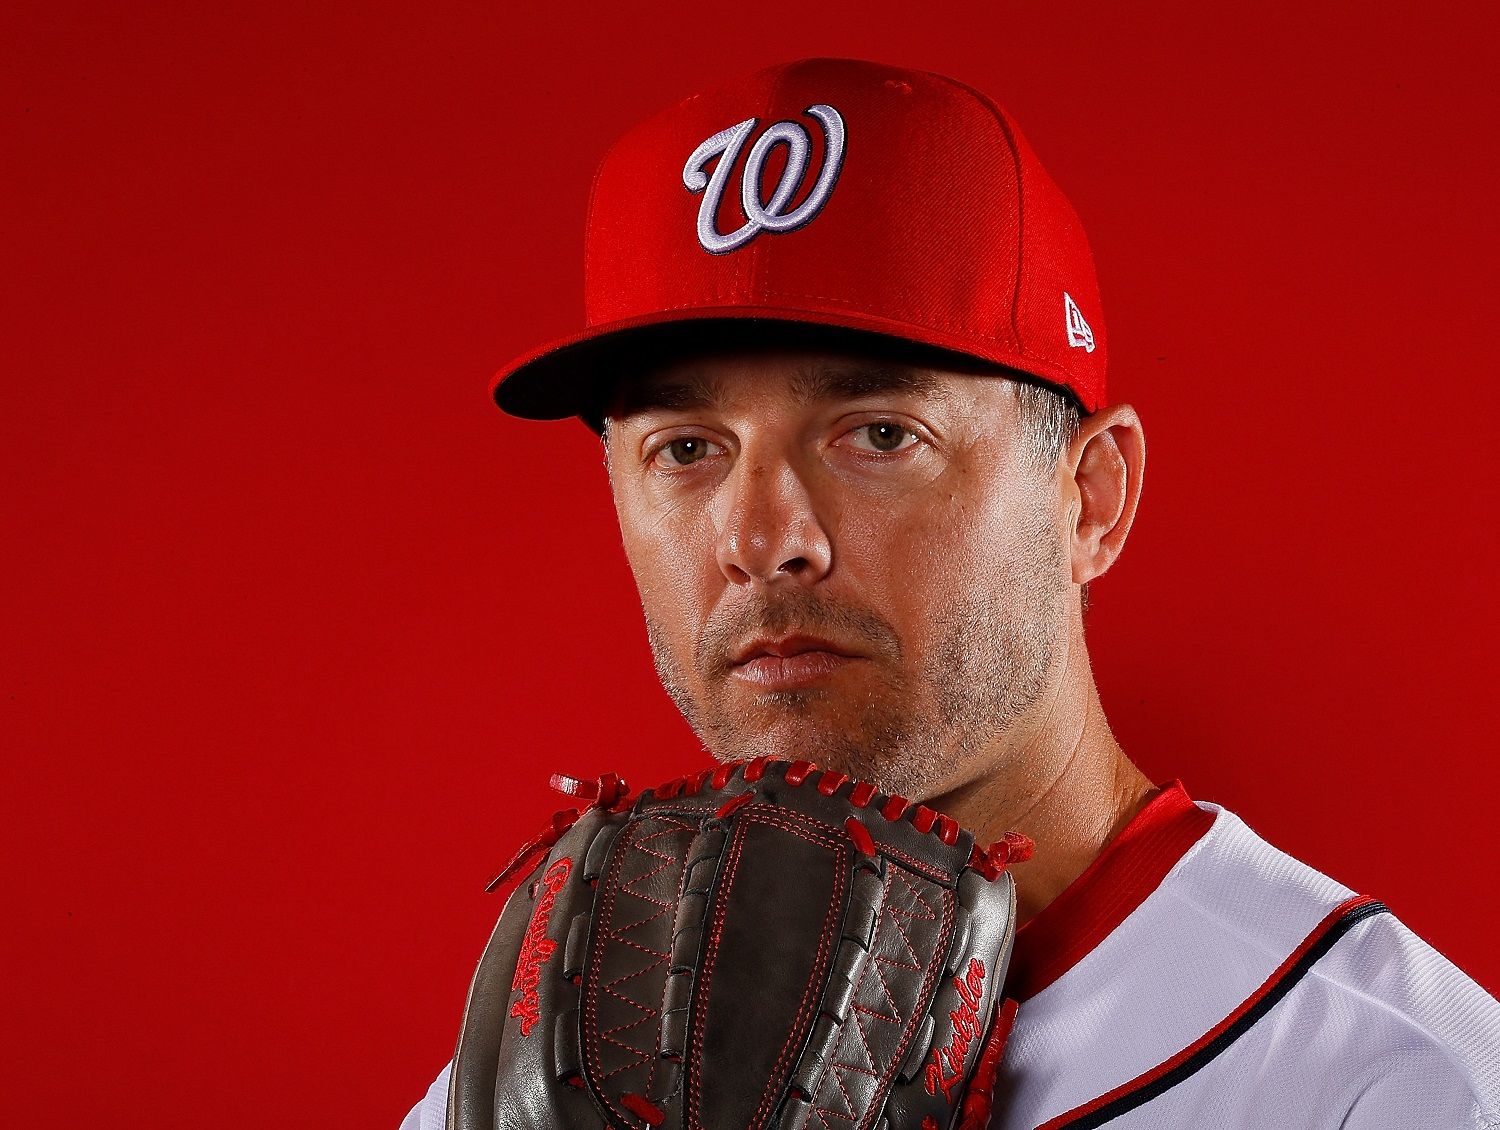 WEST PALM BEACH, FL - FEBRUARY 22:  Brandon Kintzler #21 of the Washington Nationals poses for a photo during photo days at The Ballpark of the Palm Beaches on February 22, 2018 in West Palm Beach, Florida.  (Photo by Kevin C. Cox/Getty Images)